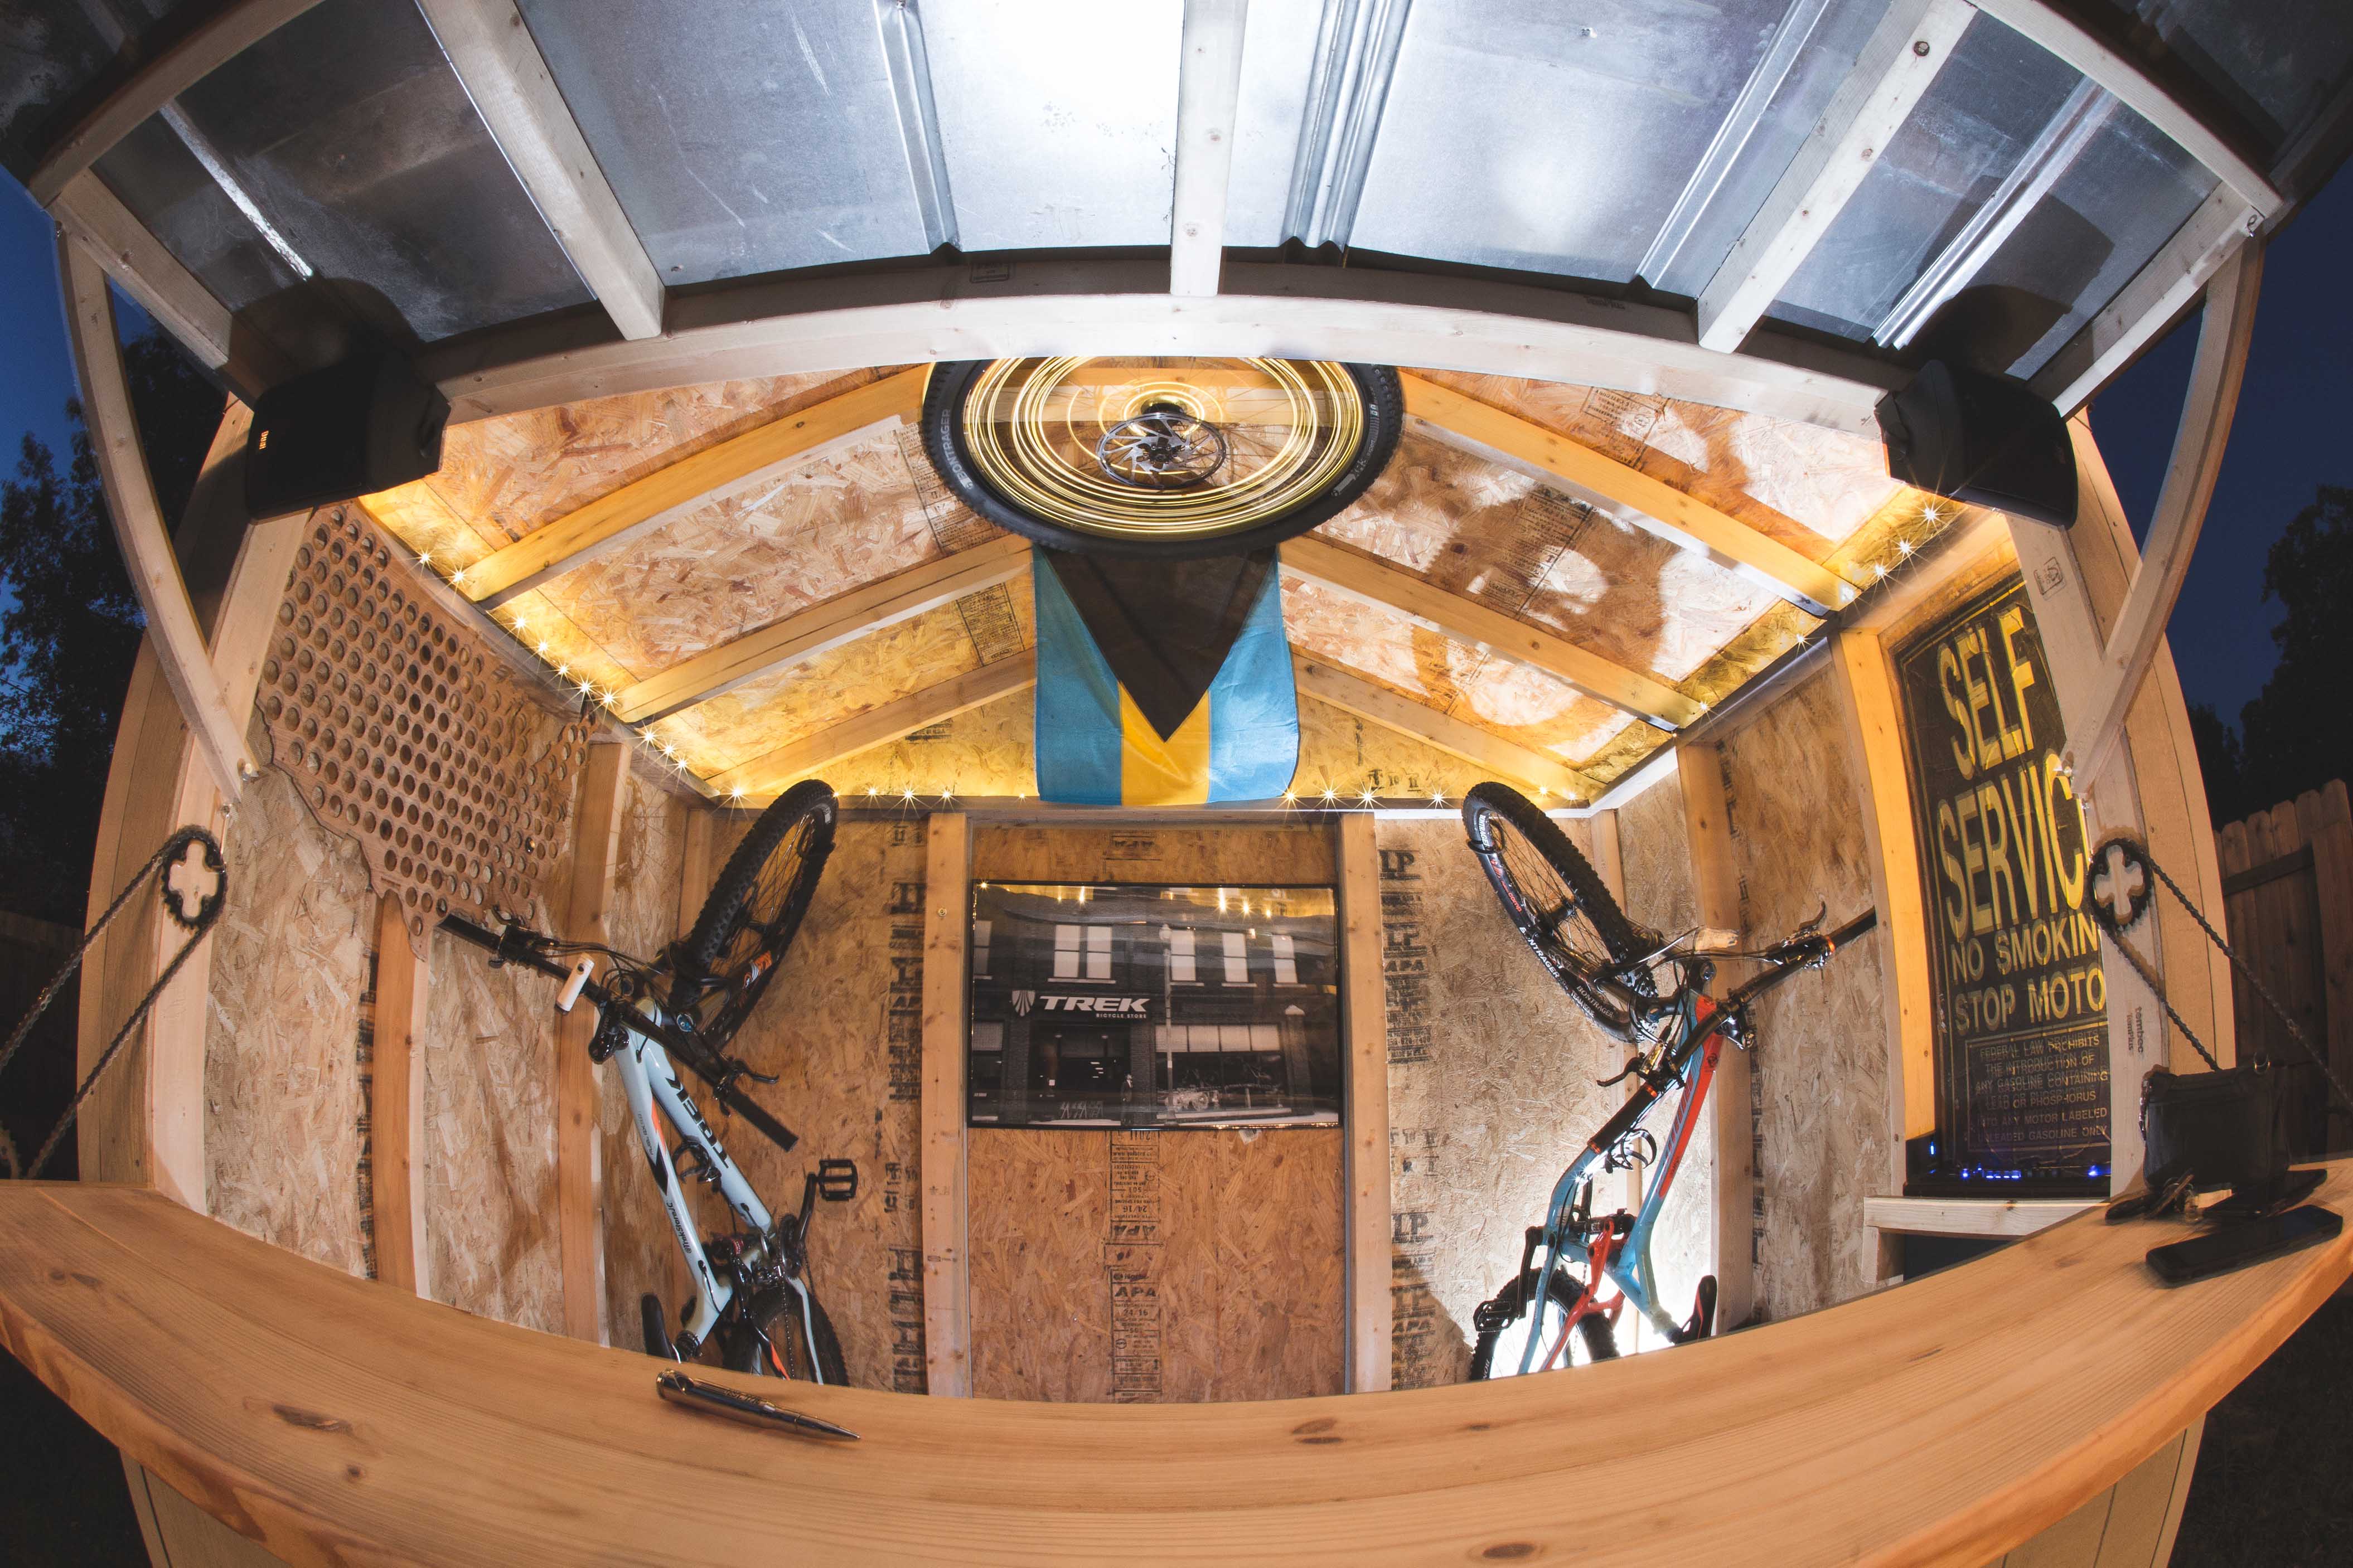 Beer Shed Building Episode Two: Watch These Guys Turn a Shed into a Bike and Beer Shed